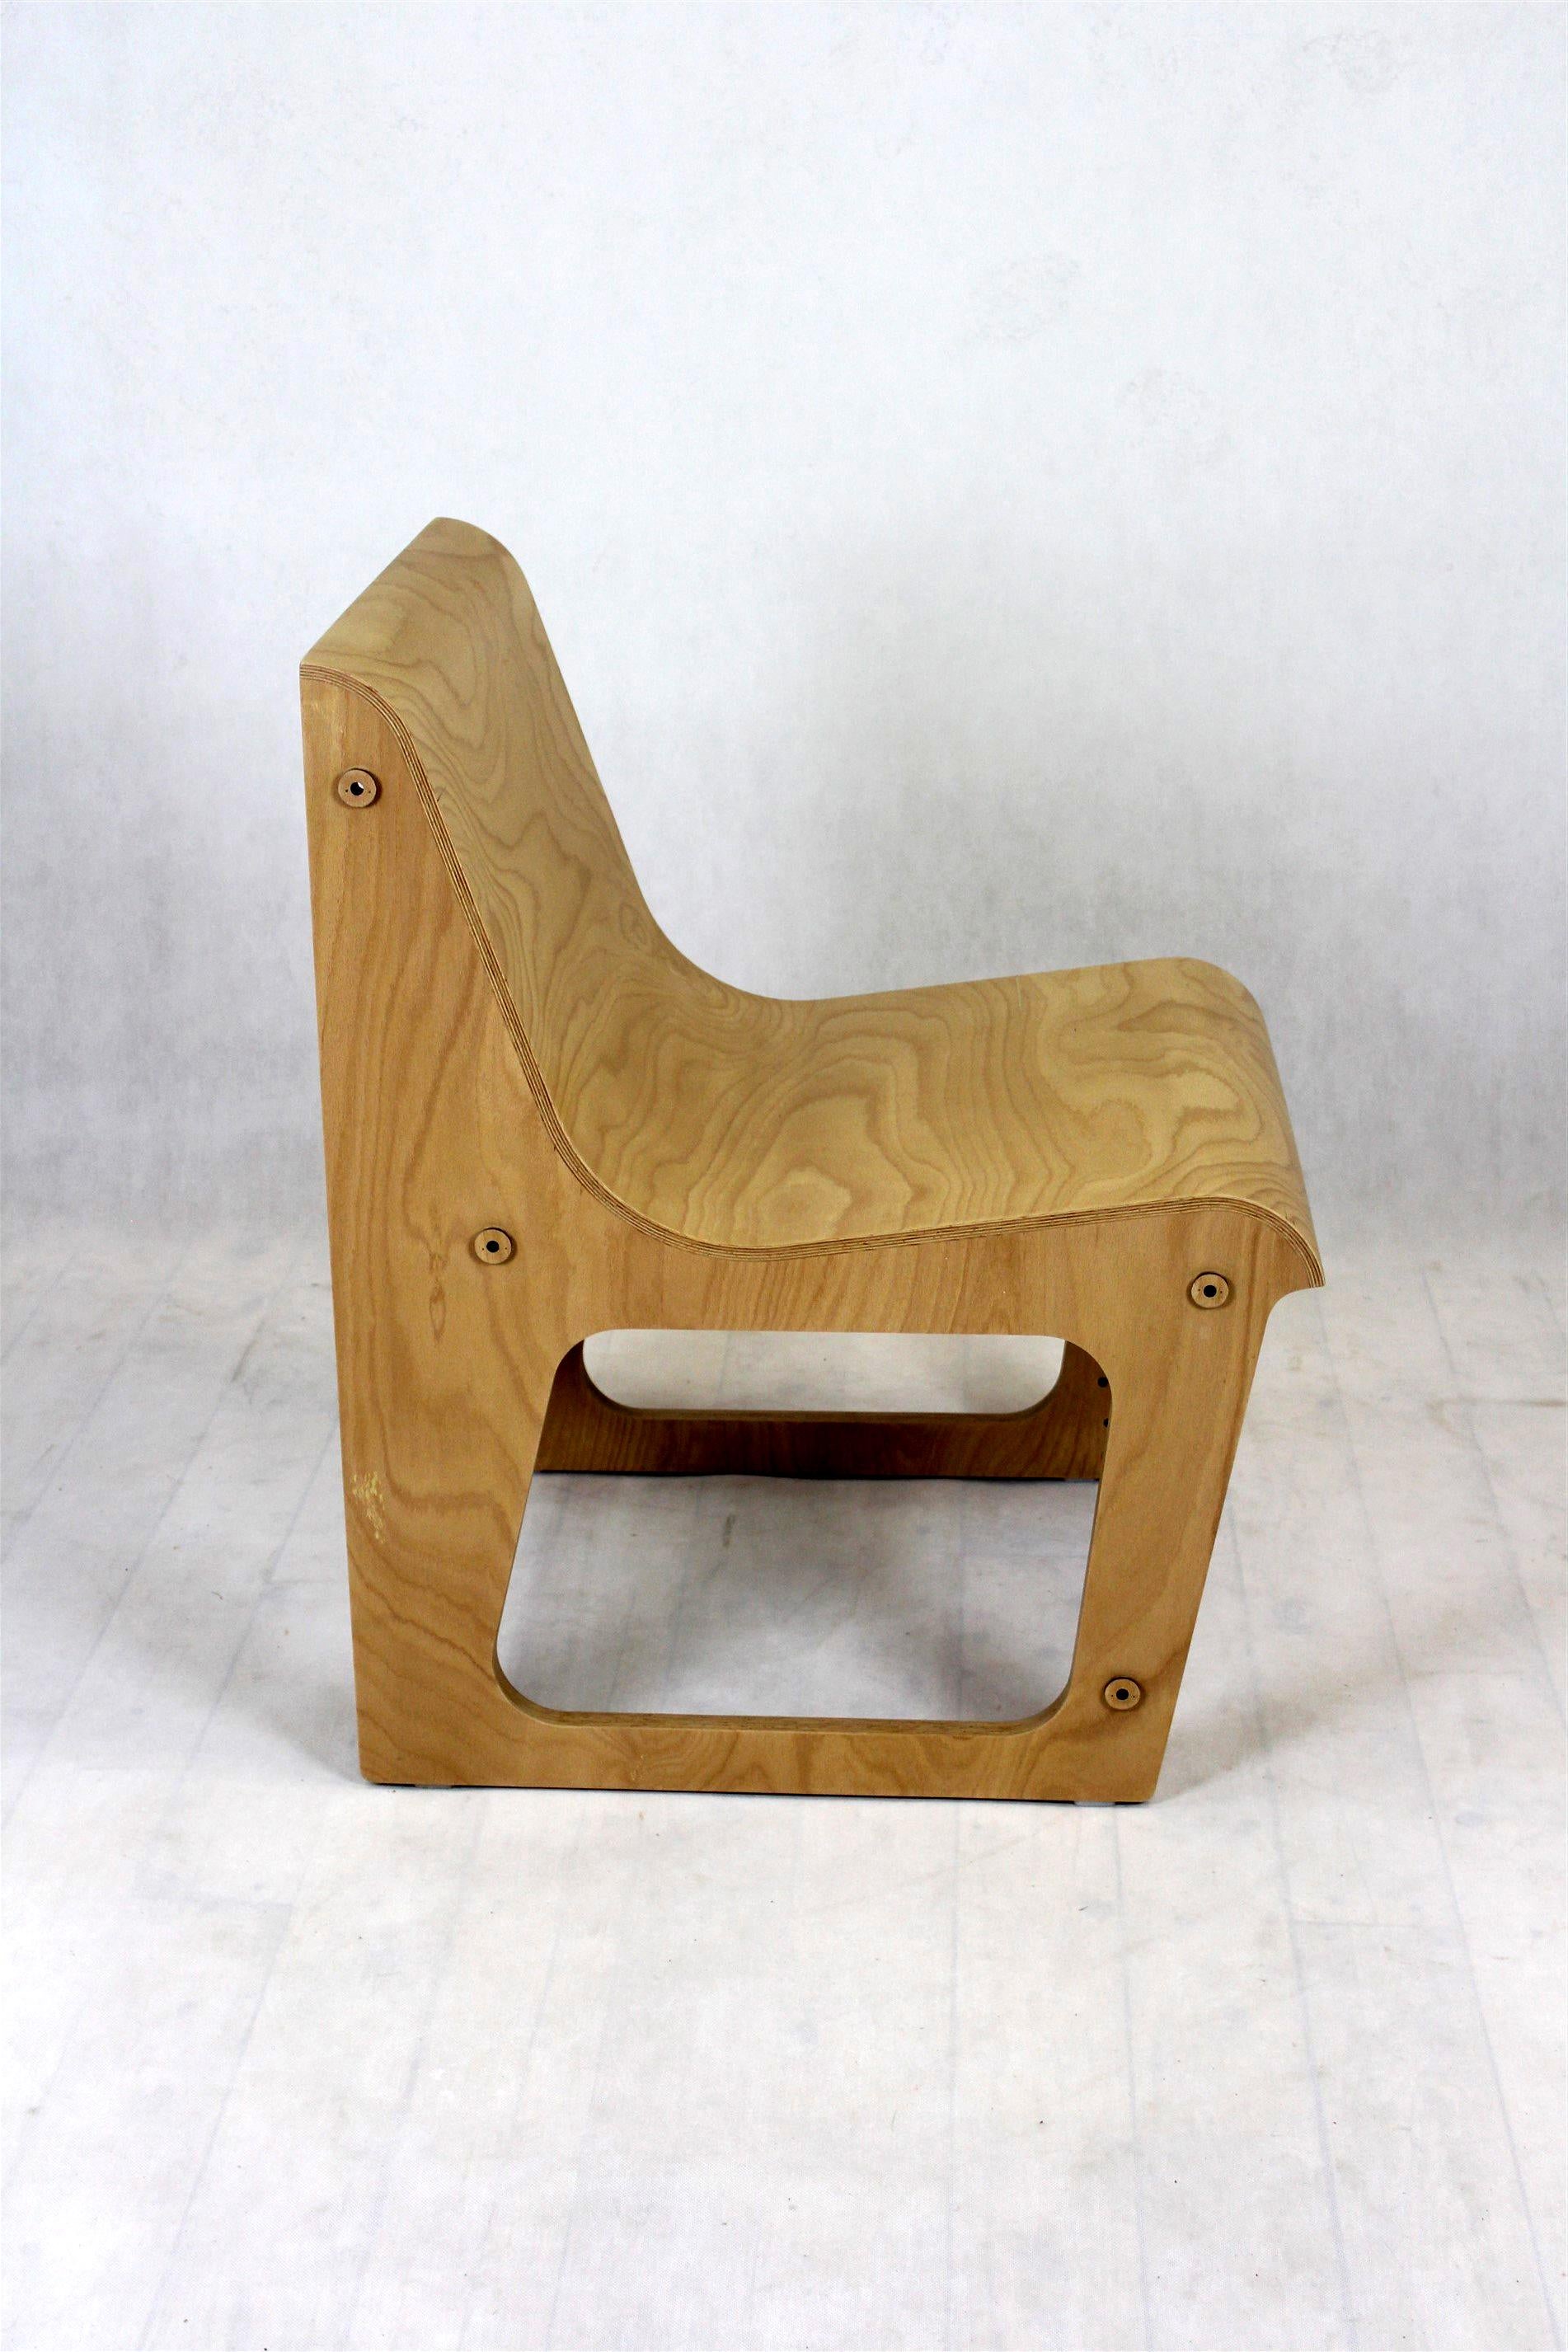 Beech Plywood Symposio Bench / Chairs by René Šulc for Ton, 2010s 5